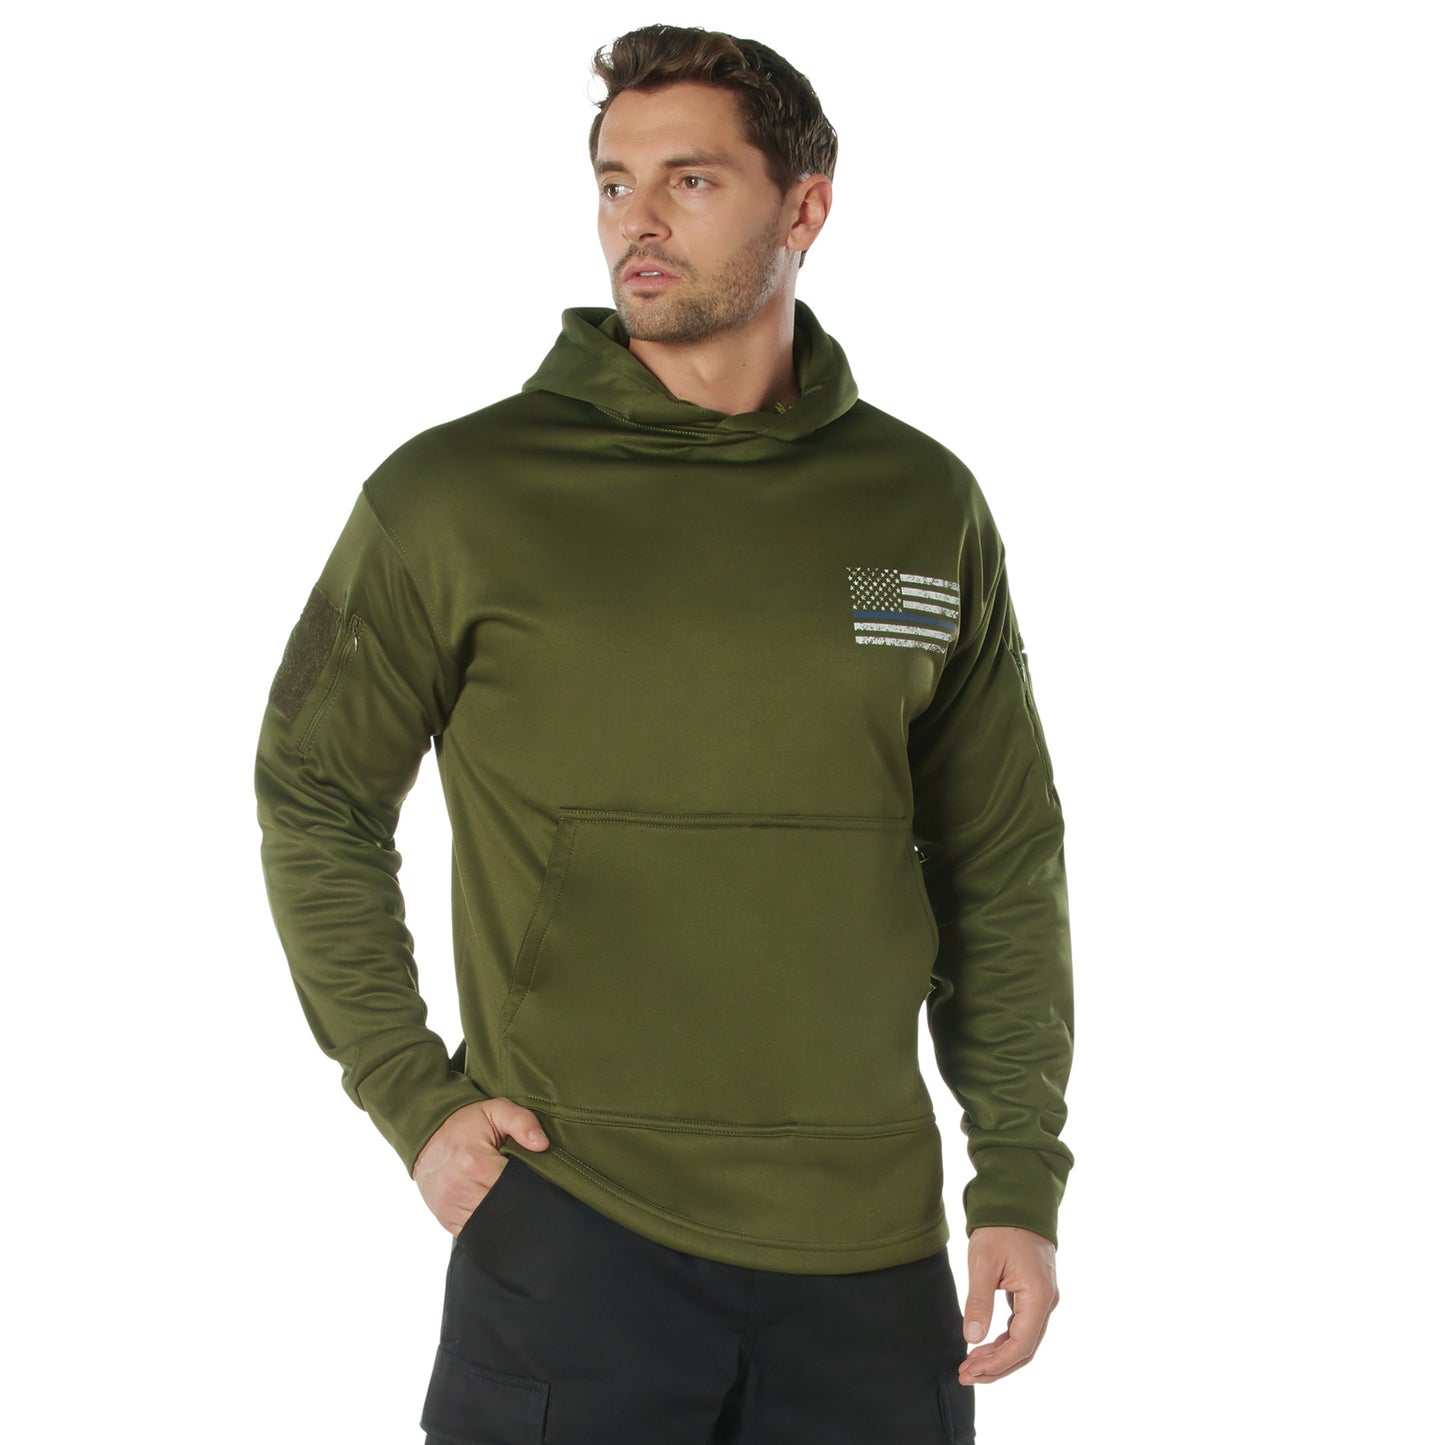 Rothco Thin Blue Line Concealed Carry Hoodie - Olive Drab